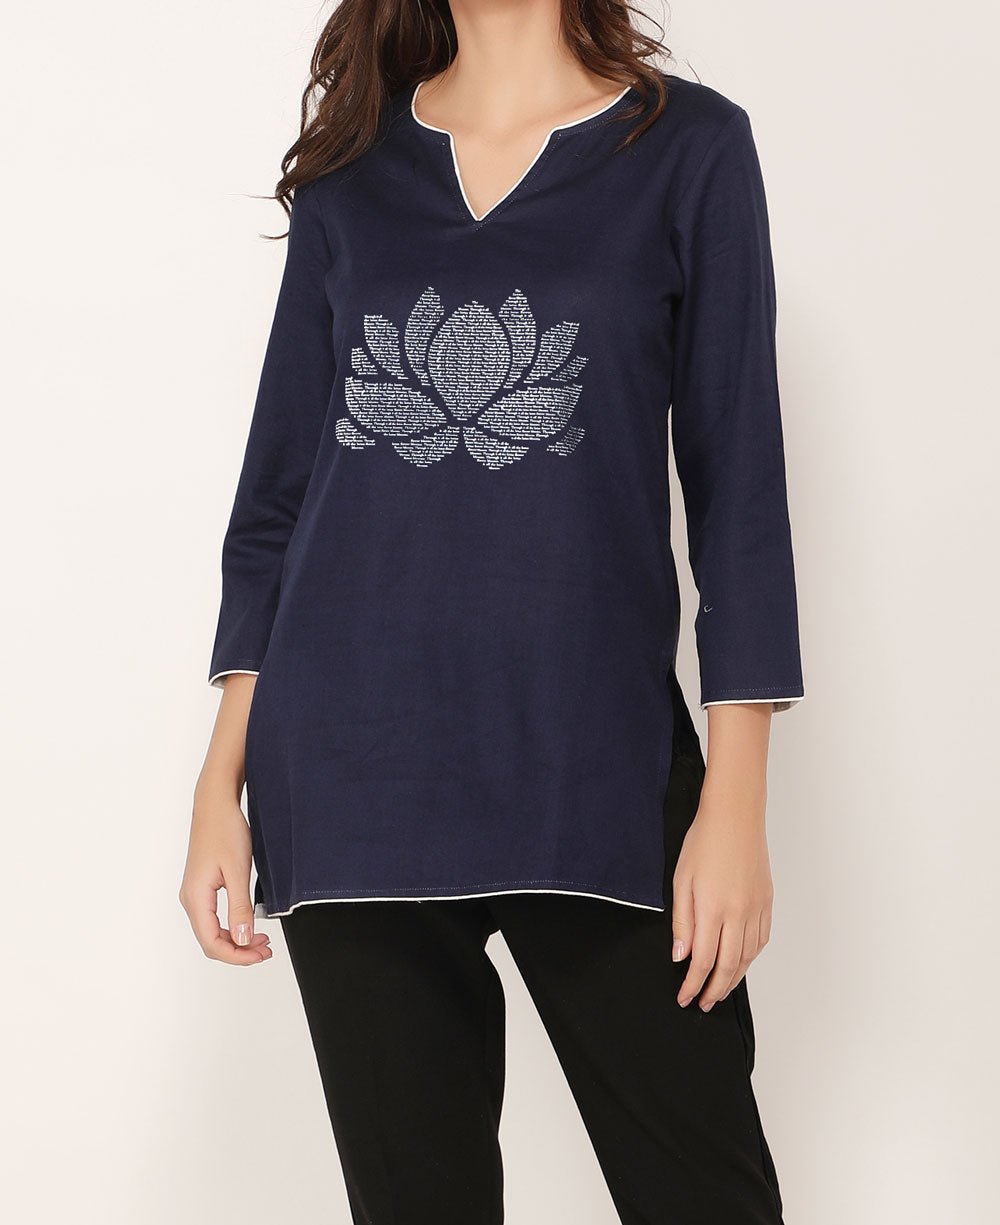 Through It All The Lotus Flower Bloom Blue Tunic Top - Shirts & Tops S